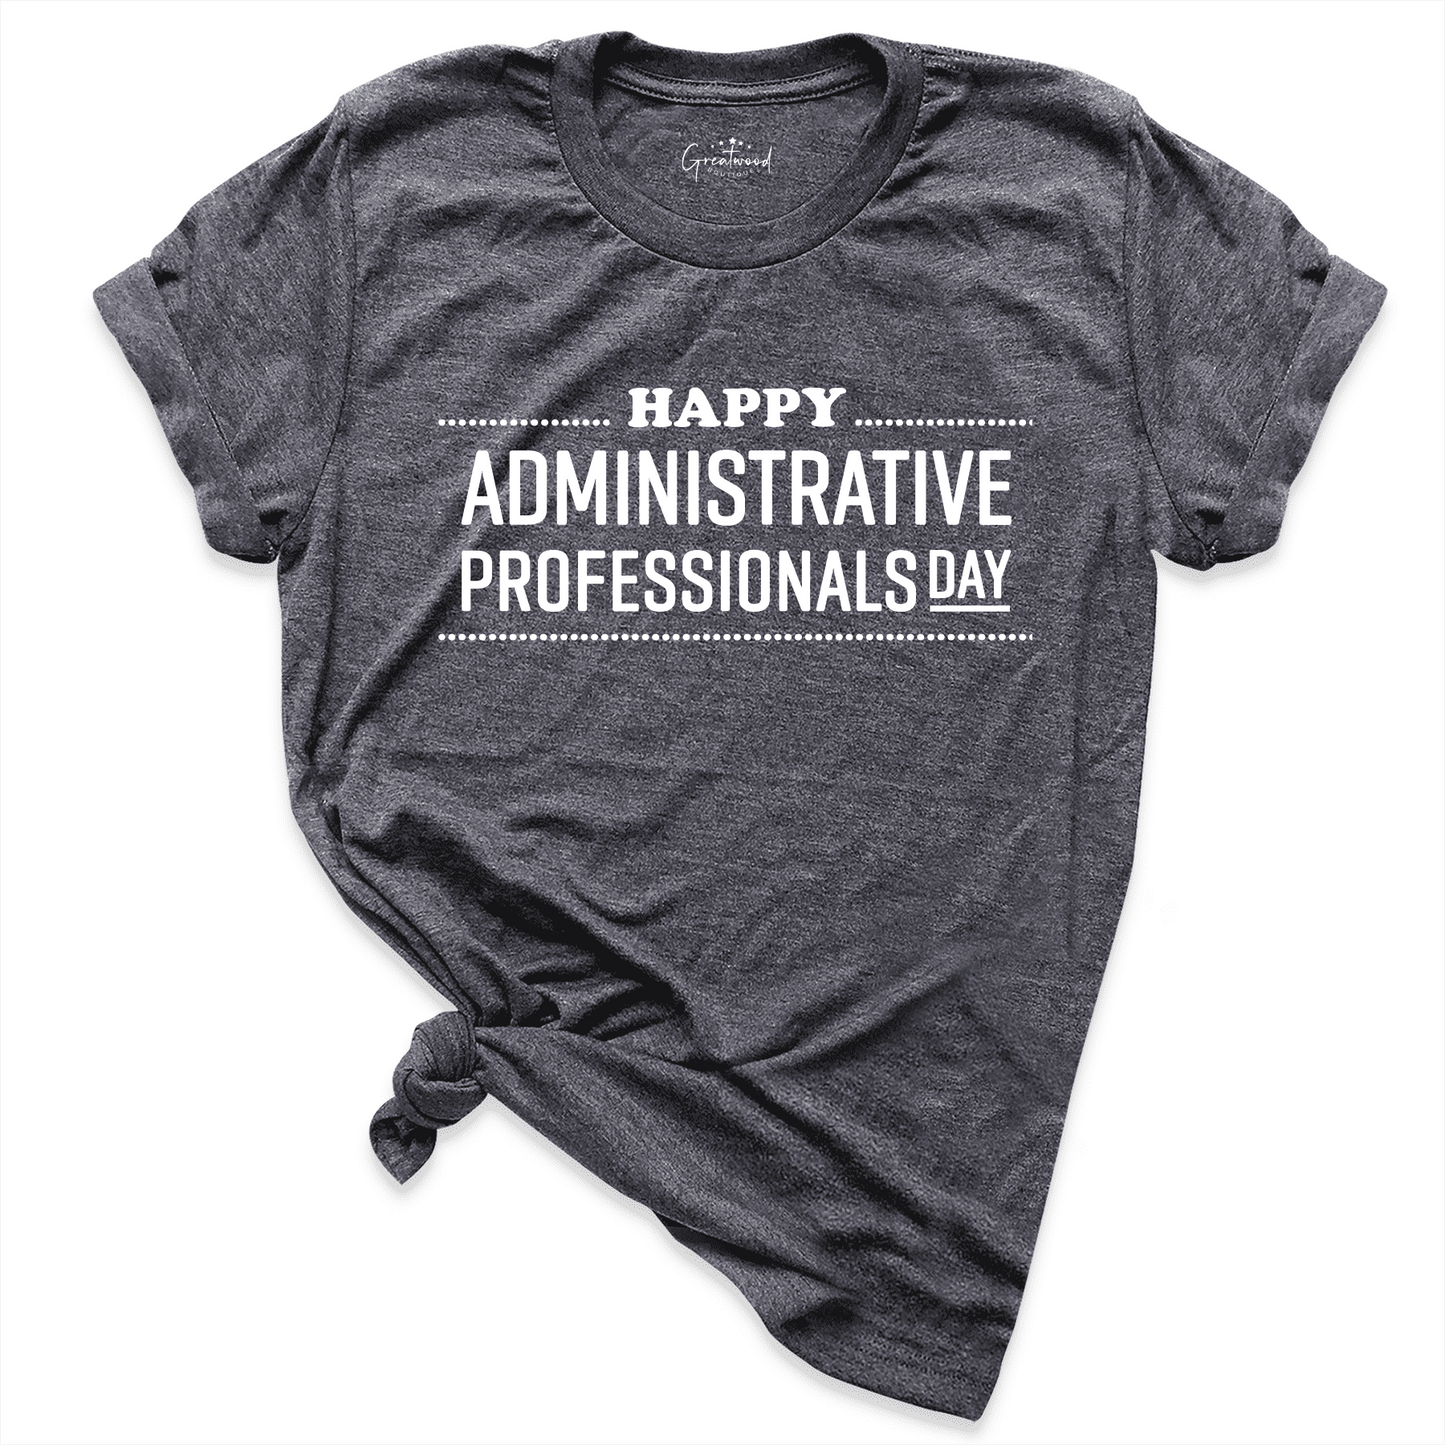 Happy Administrative Professionals Day Shirt D.Grey - Greatwood Boutique